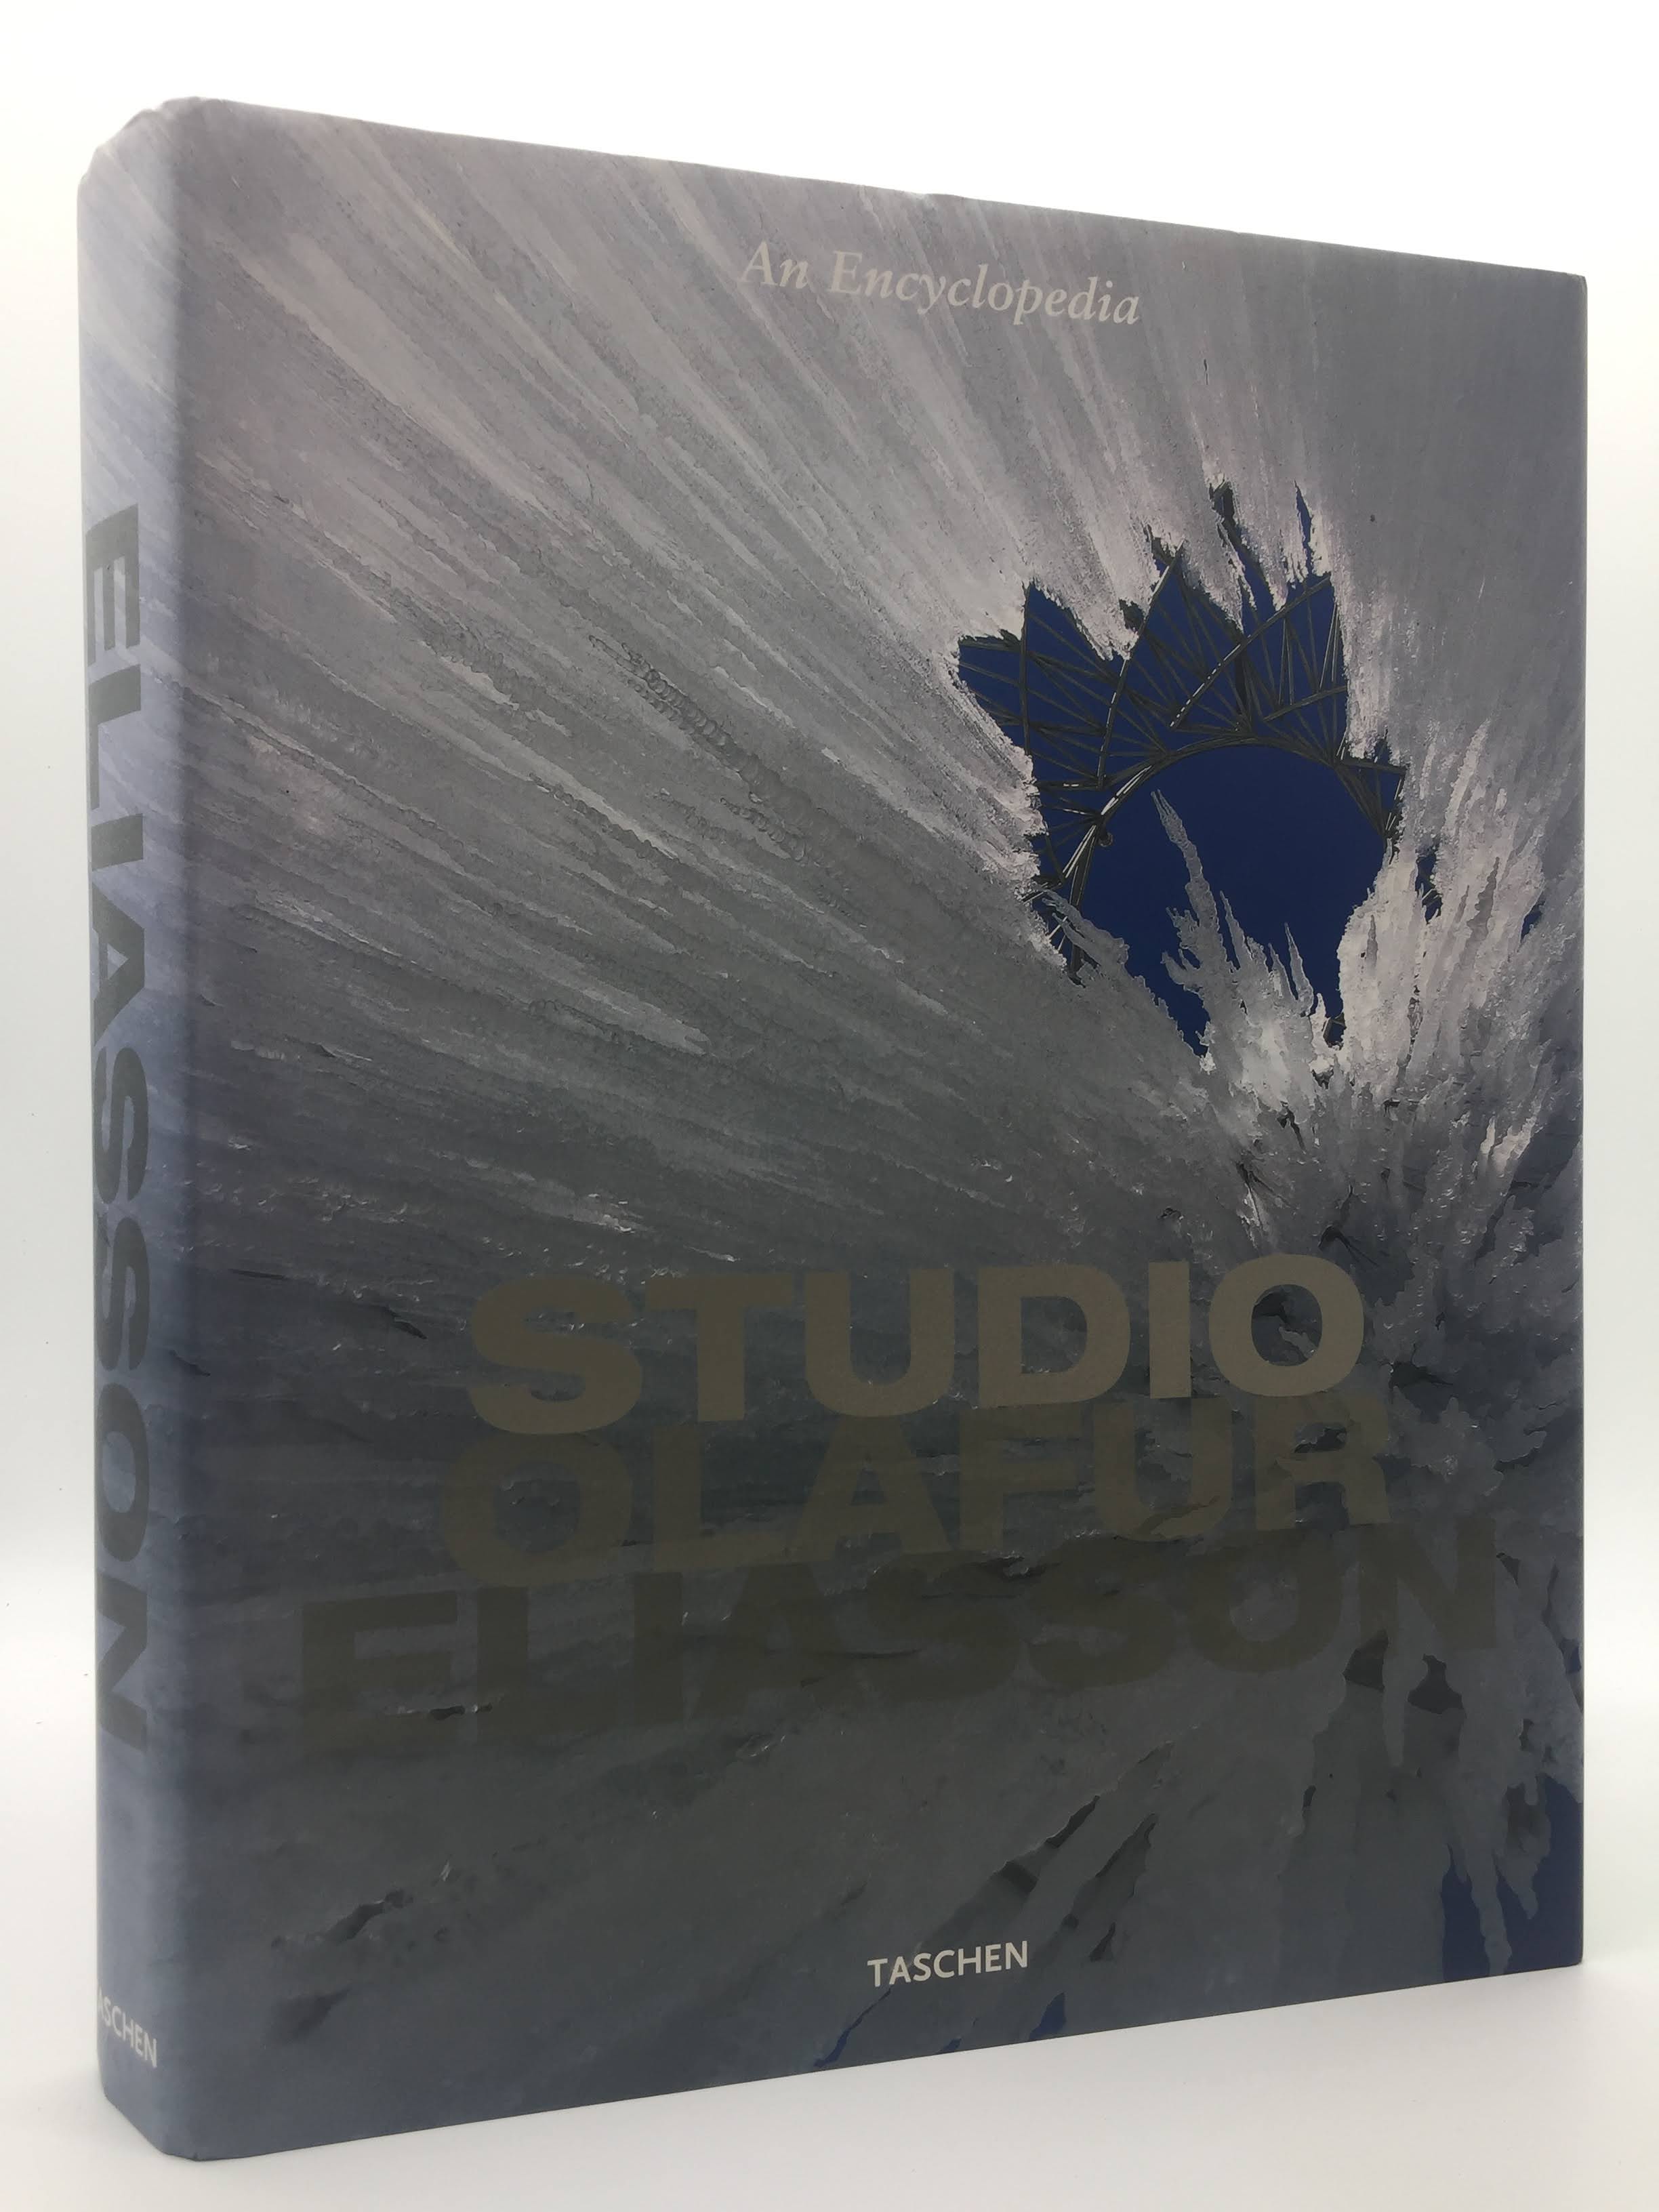 Olafur　Ursprung,　Encyclopaedia　Large　Series)　Studio　An　Art　(2008)　Eliasson:　Hardcover　(Extra　Holt　by　Philip:　Fine　Books